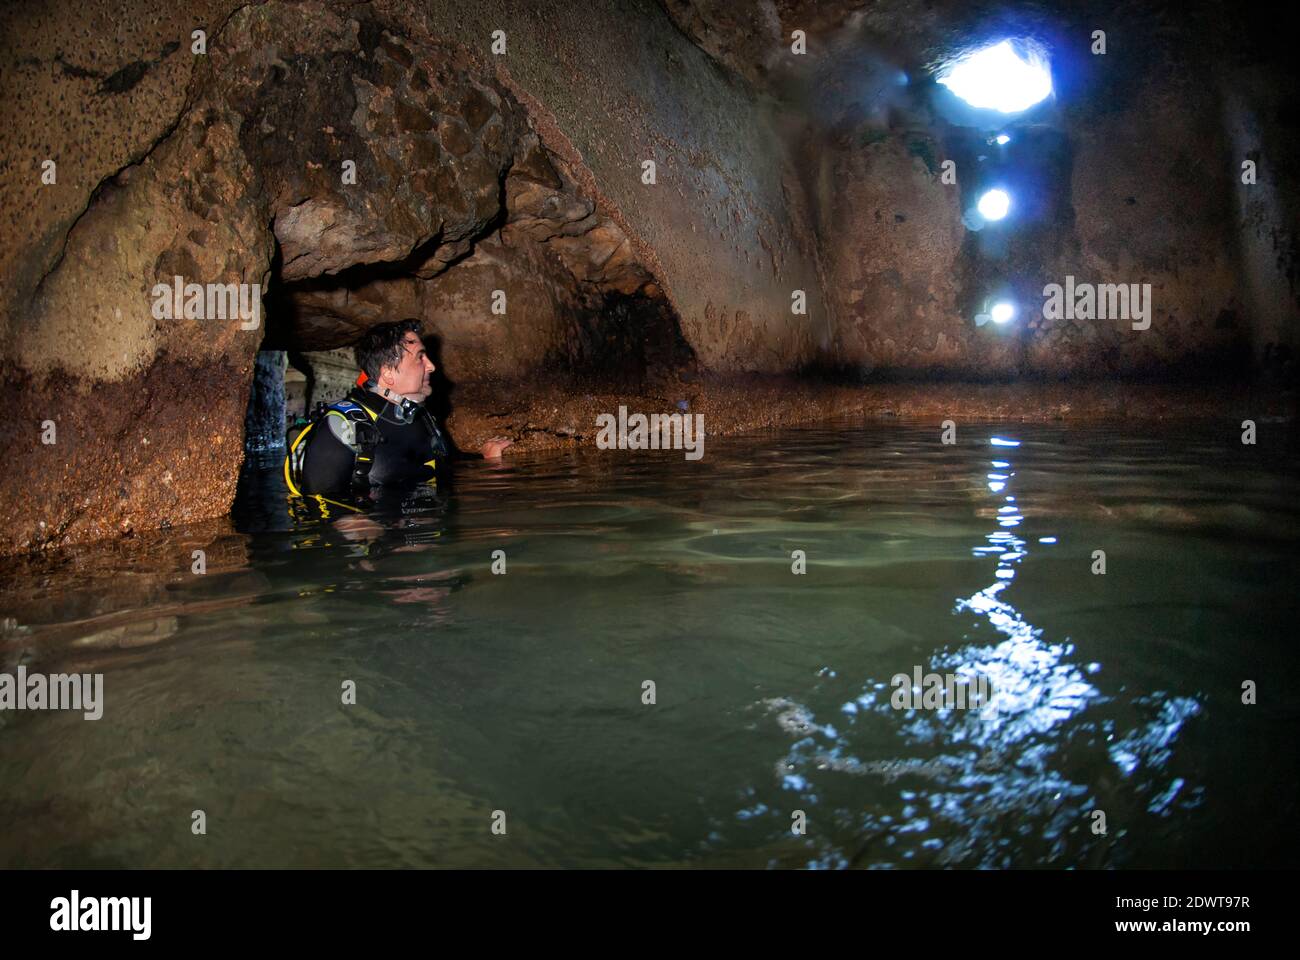 Scuba diver coming out of a submerged ancient Roman market room. Submerged ancient Roman building ruines. Dragonara caves, Miseno. Campi Flegrei (Phle Stock Photo